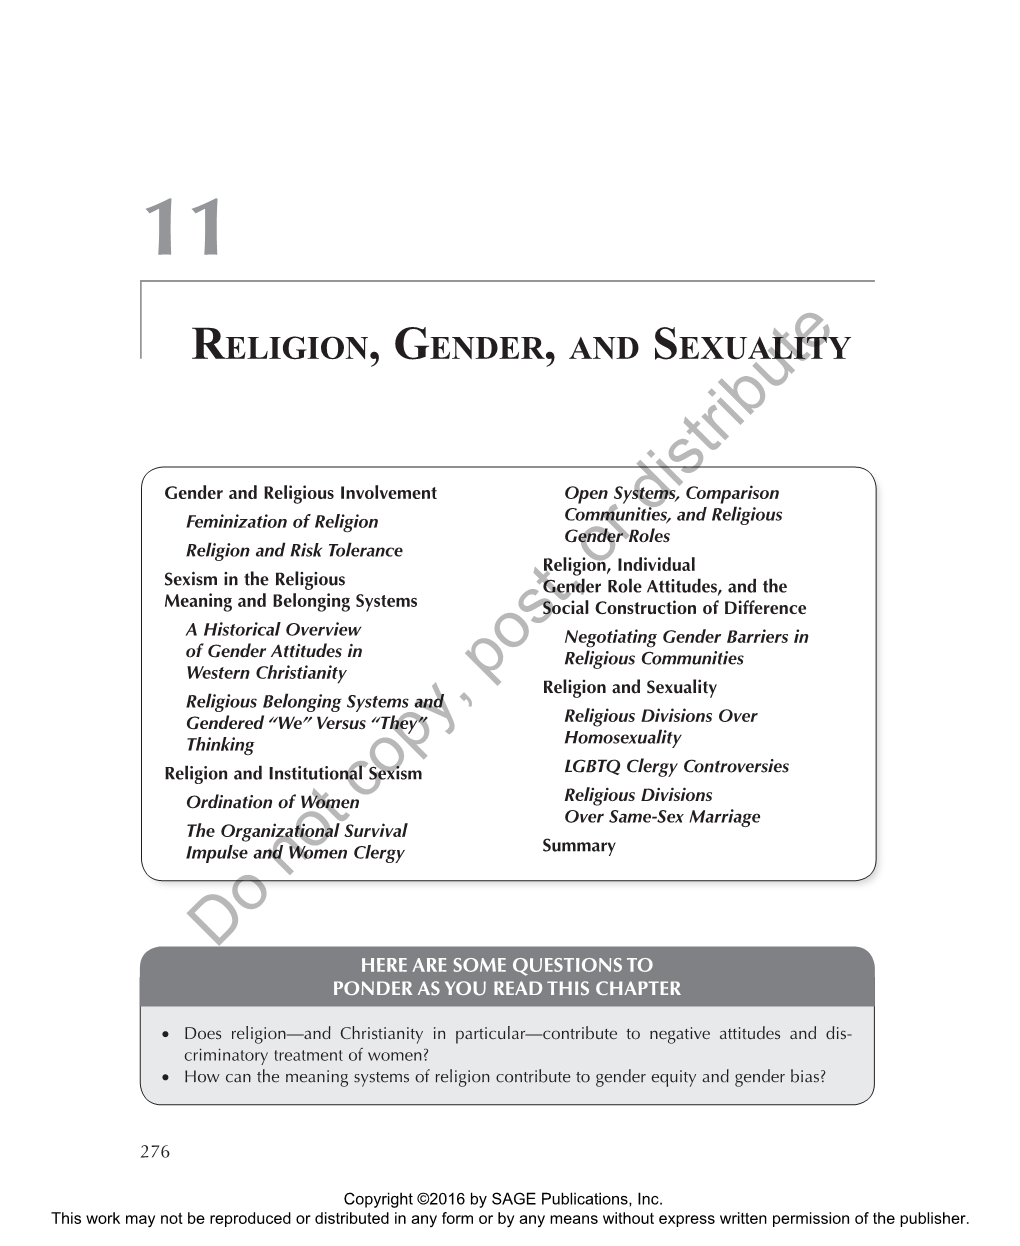 Religion, Gender, and Sexuality